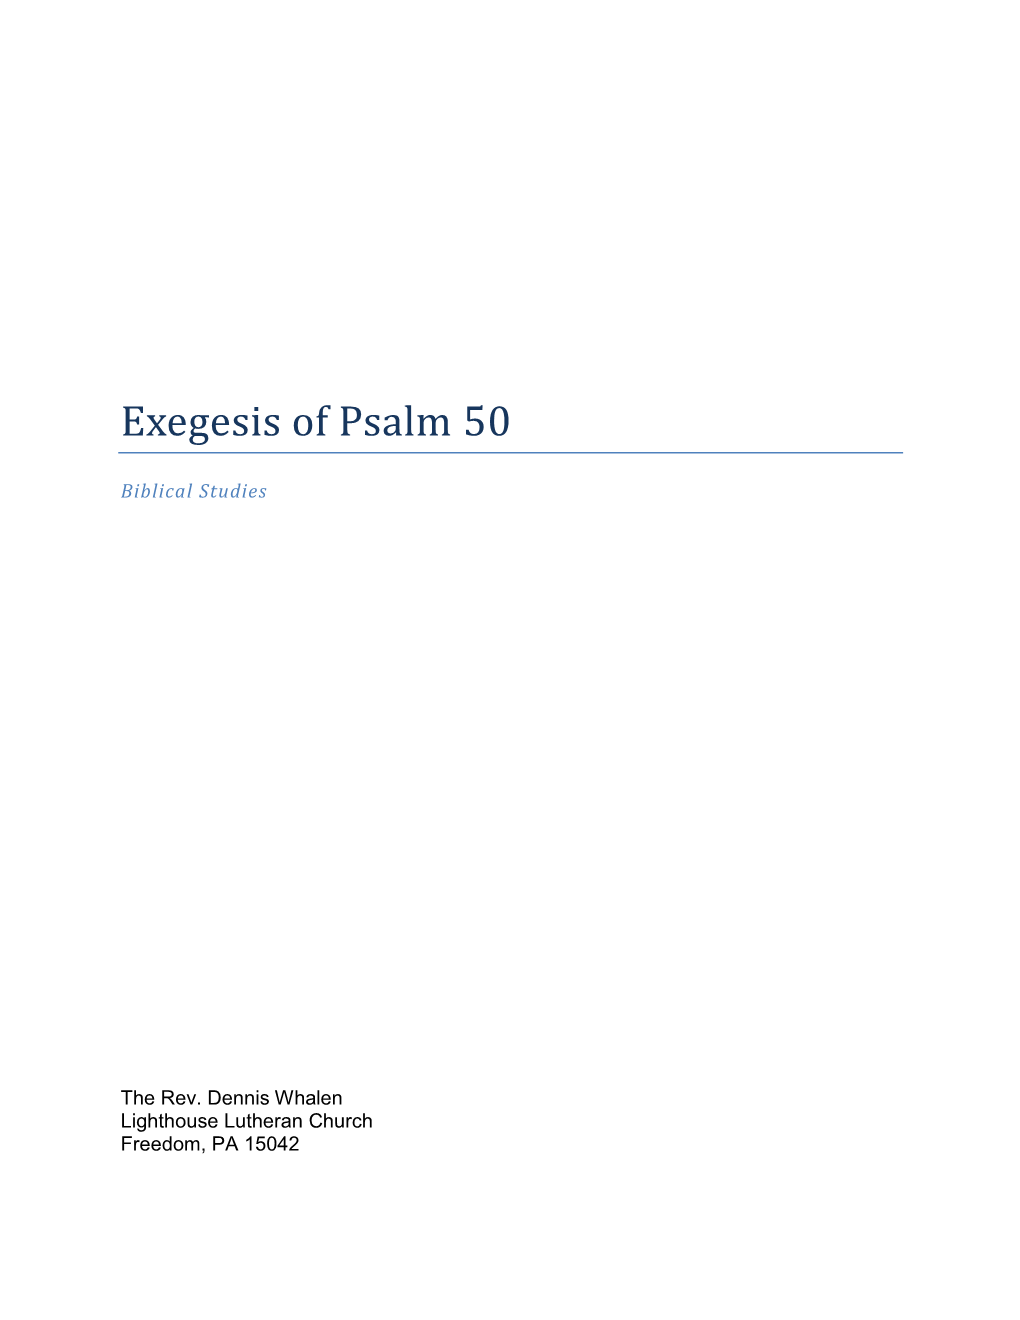 Exegesis of Psalm 50